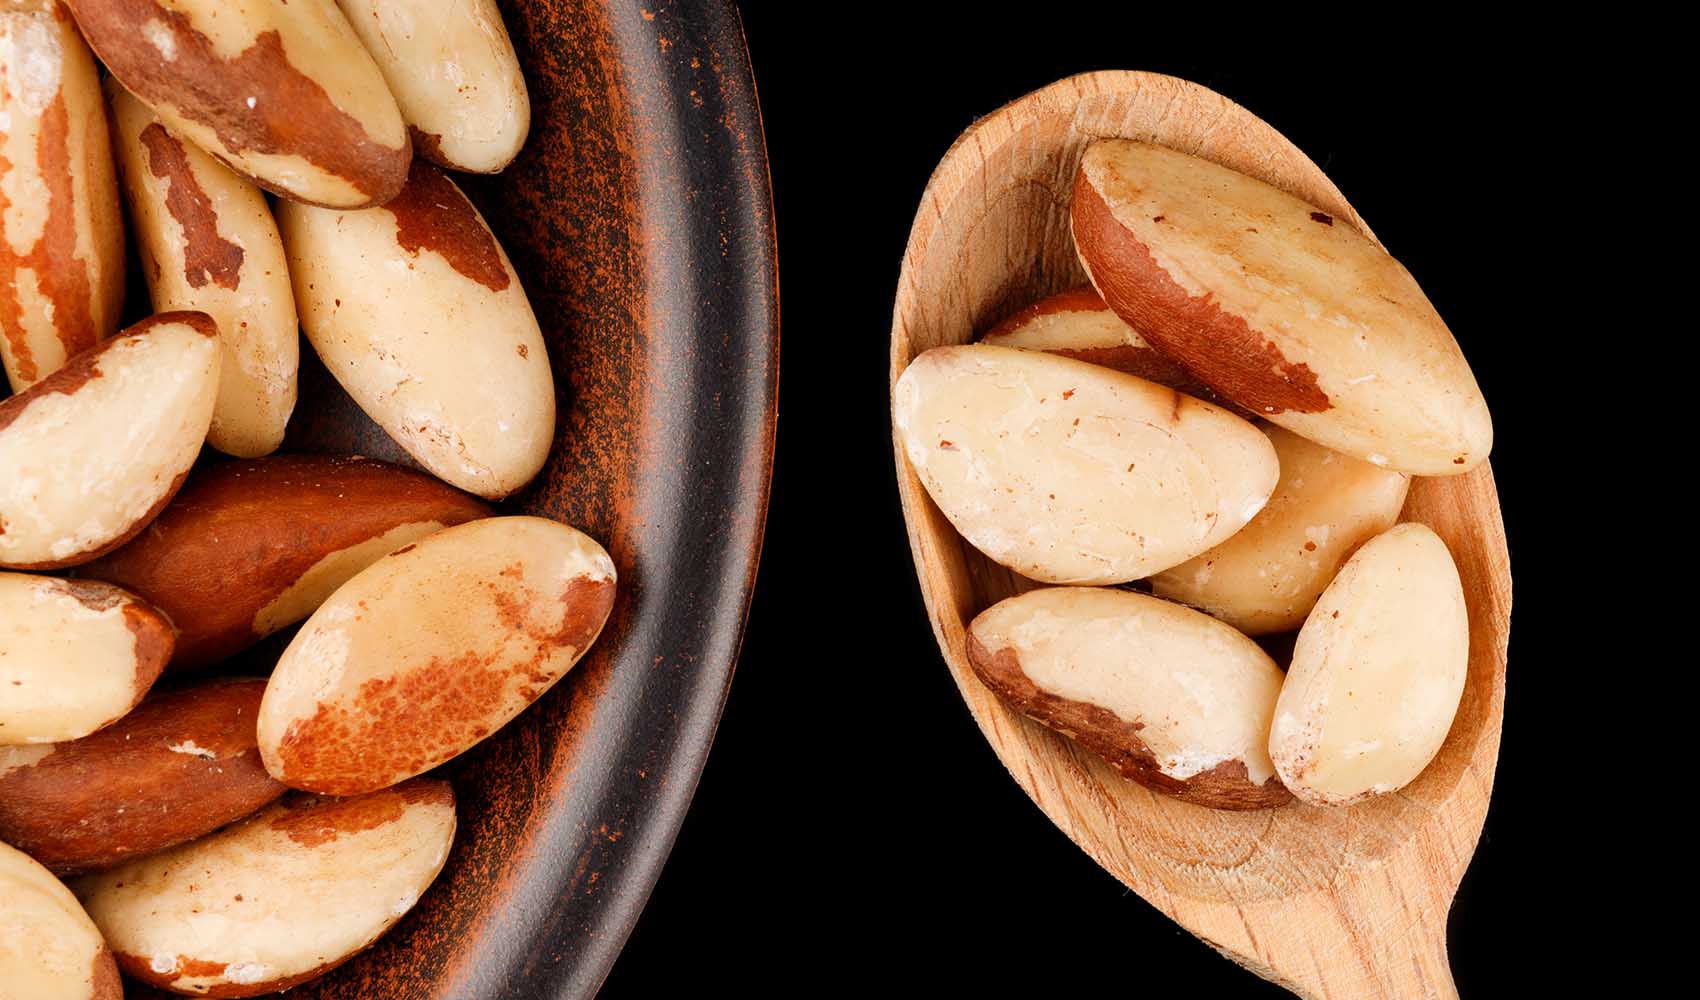 benefits-of-raw-nuts-which-nuts-are-healthiest-2